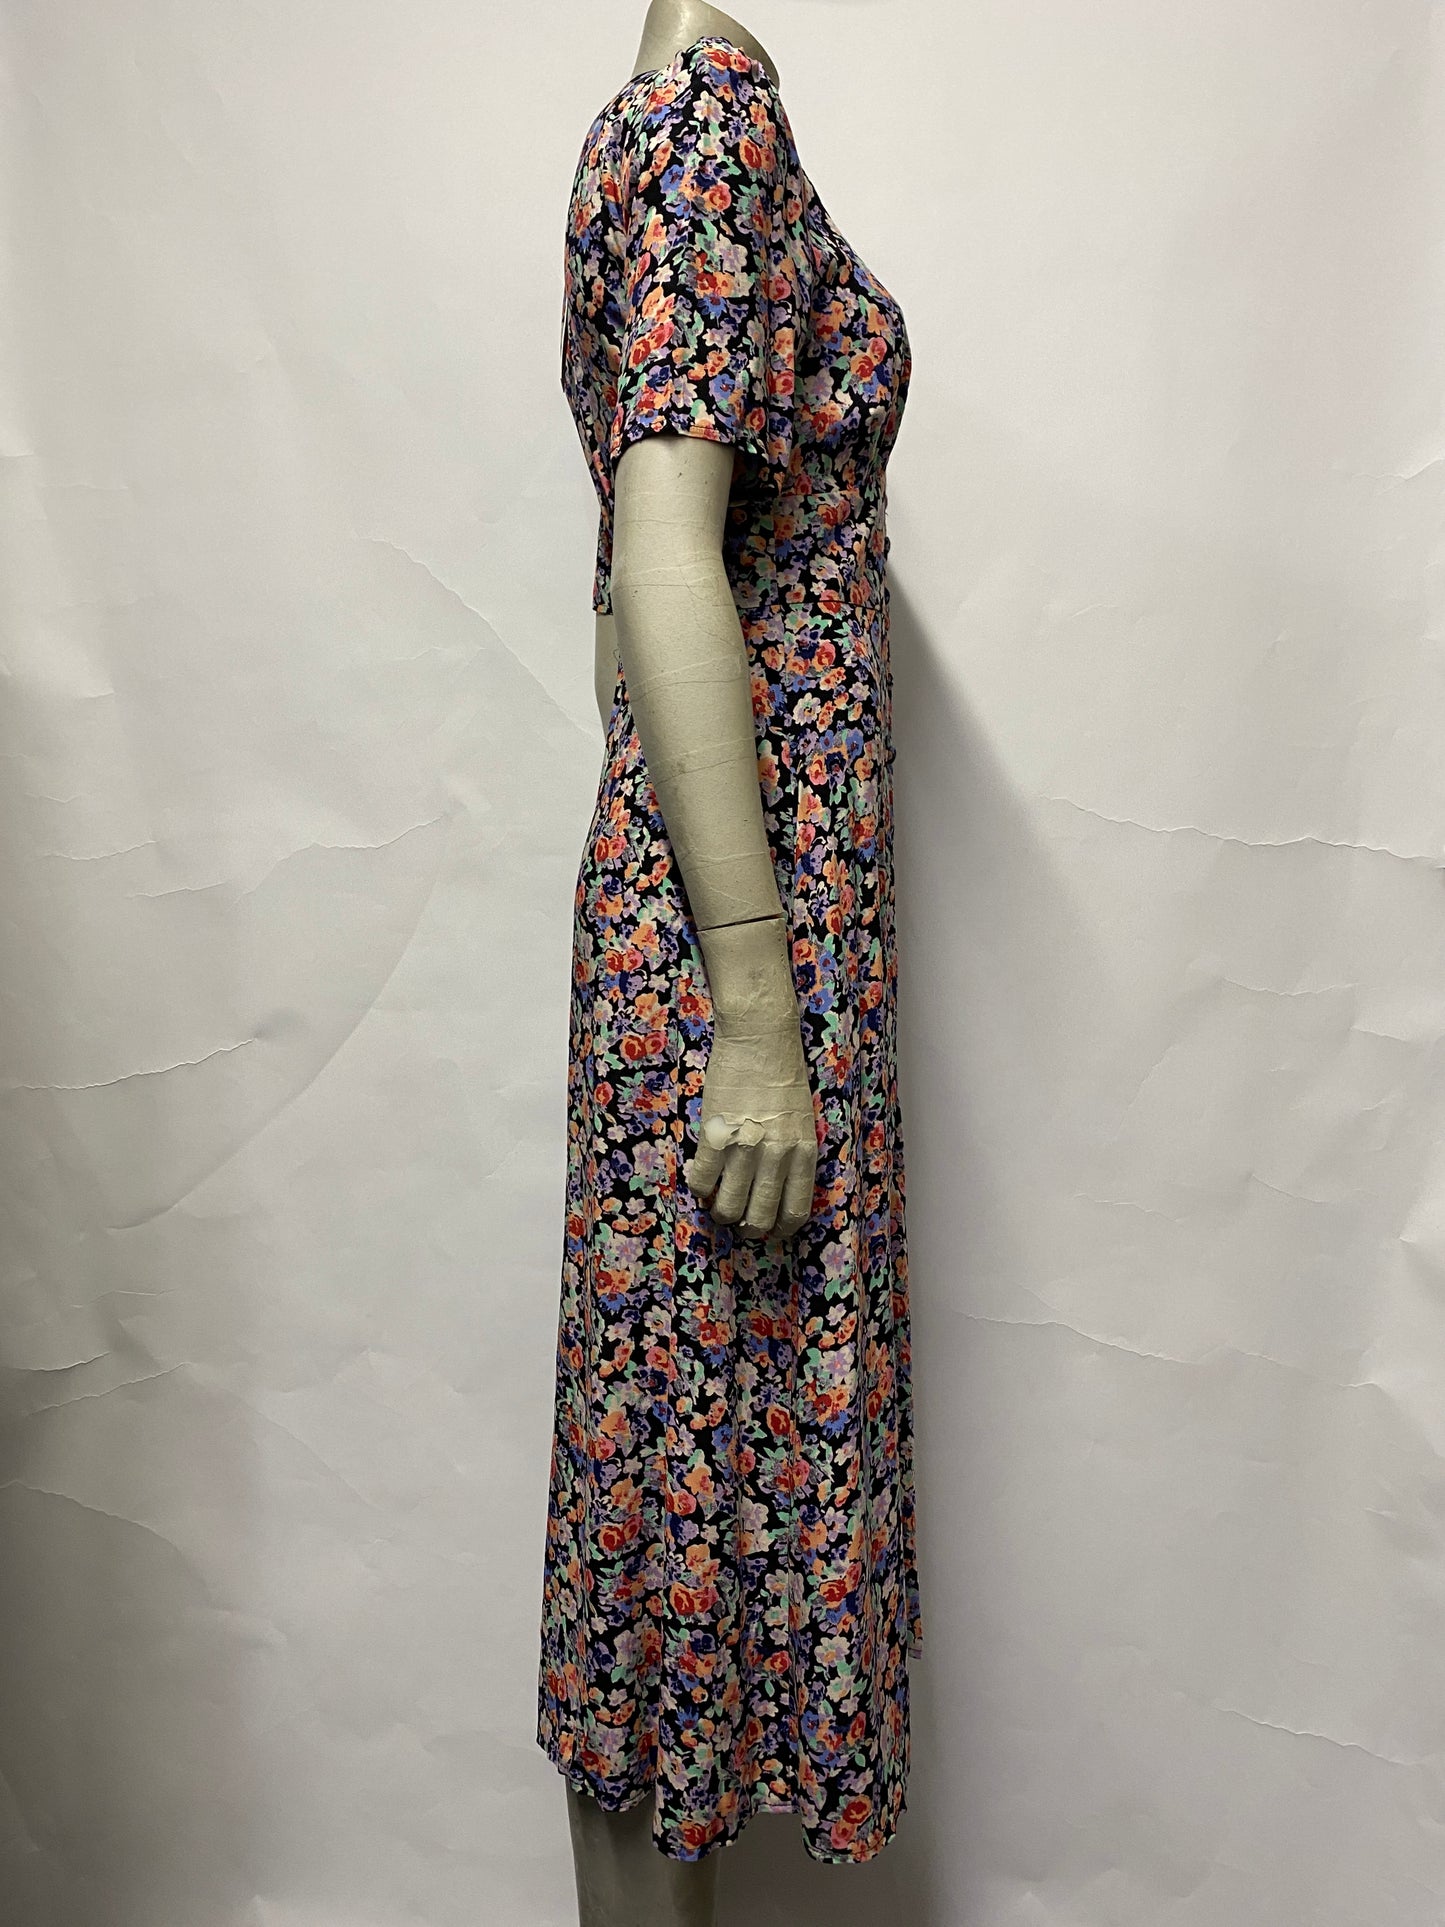 Nobody's Child Black and Multi Floral Dress 8 BNWT